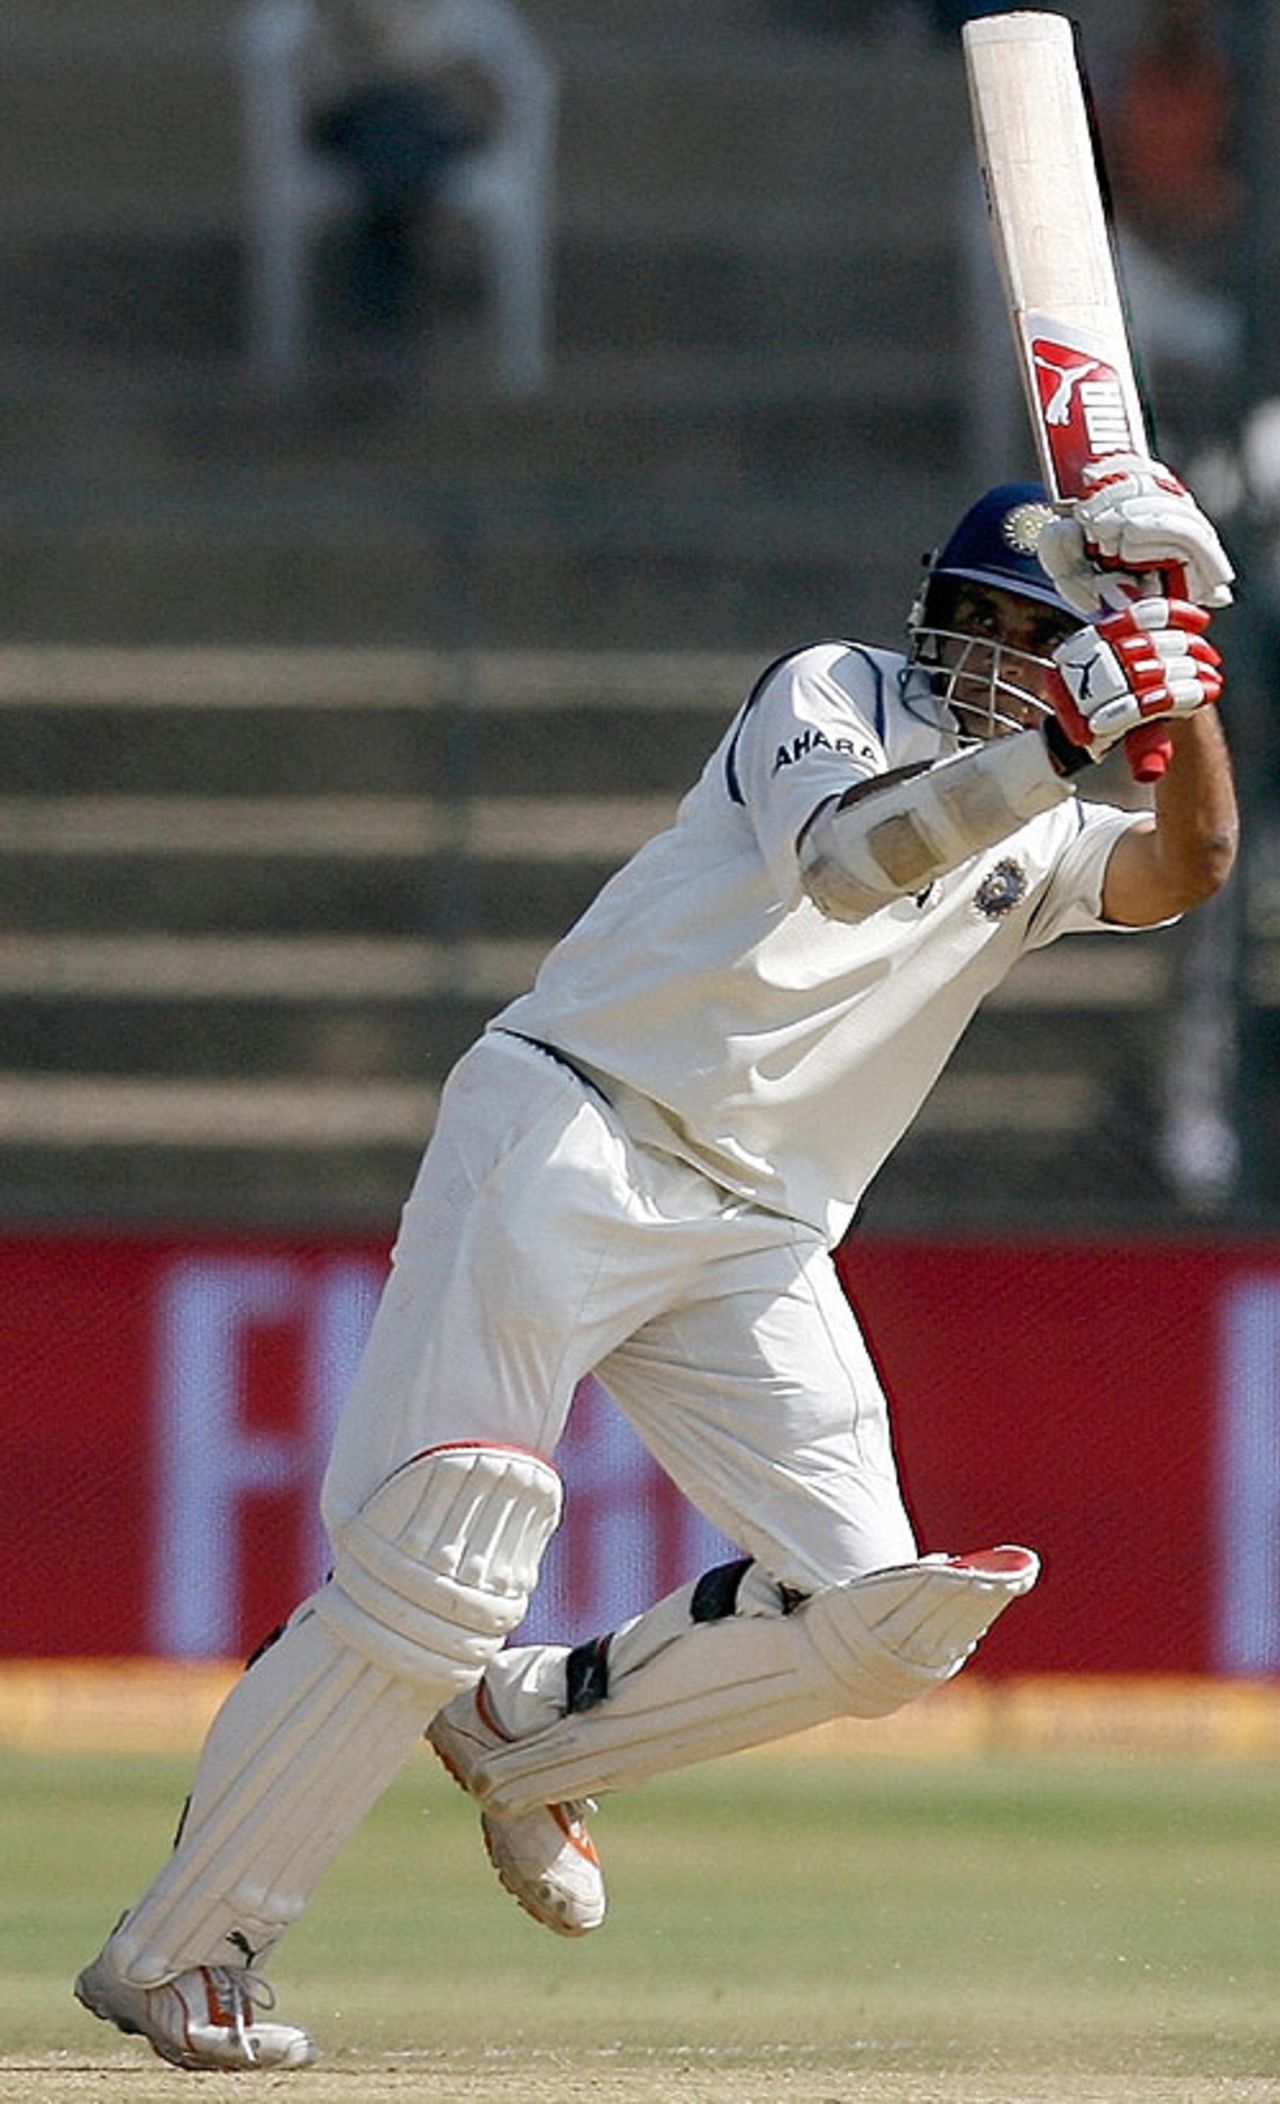 Sourav Ganguly flicks a stray ball away, India v Pakistan, 3rd Test, Bangalore, 5th day, December 12, 2007 

